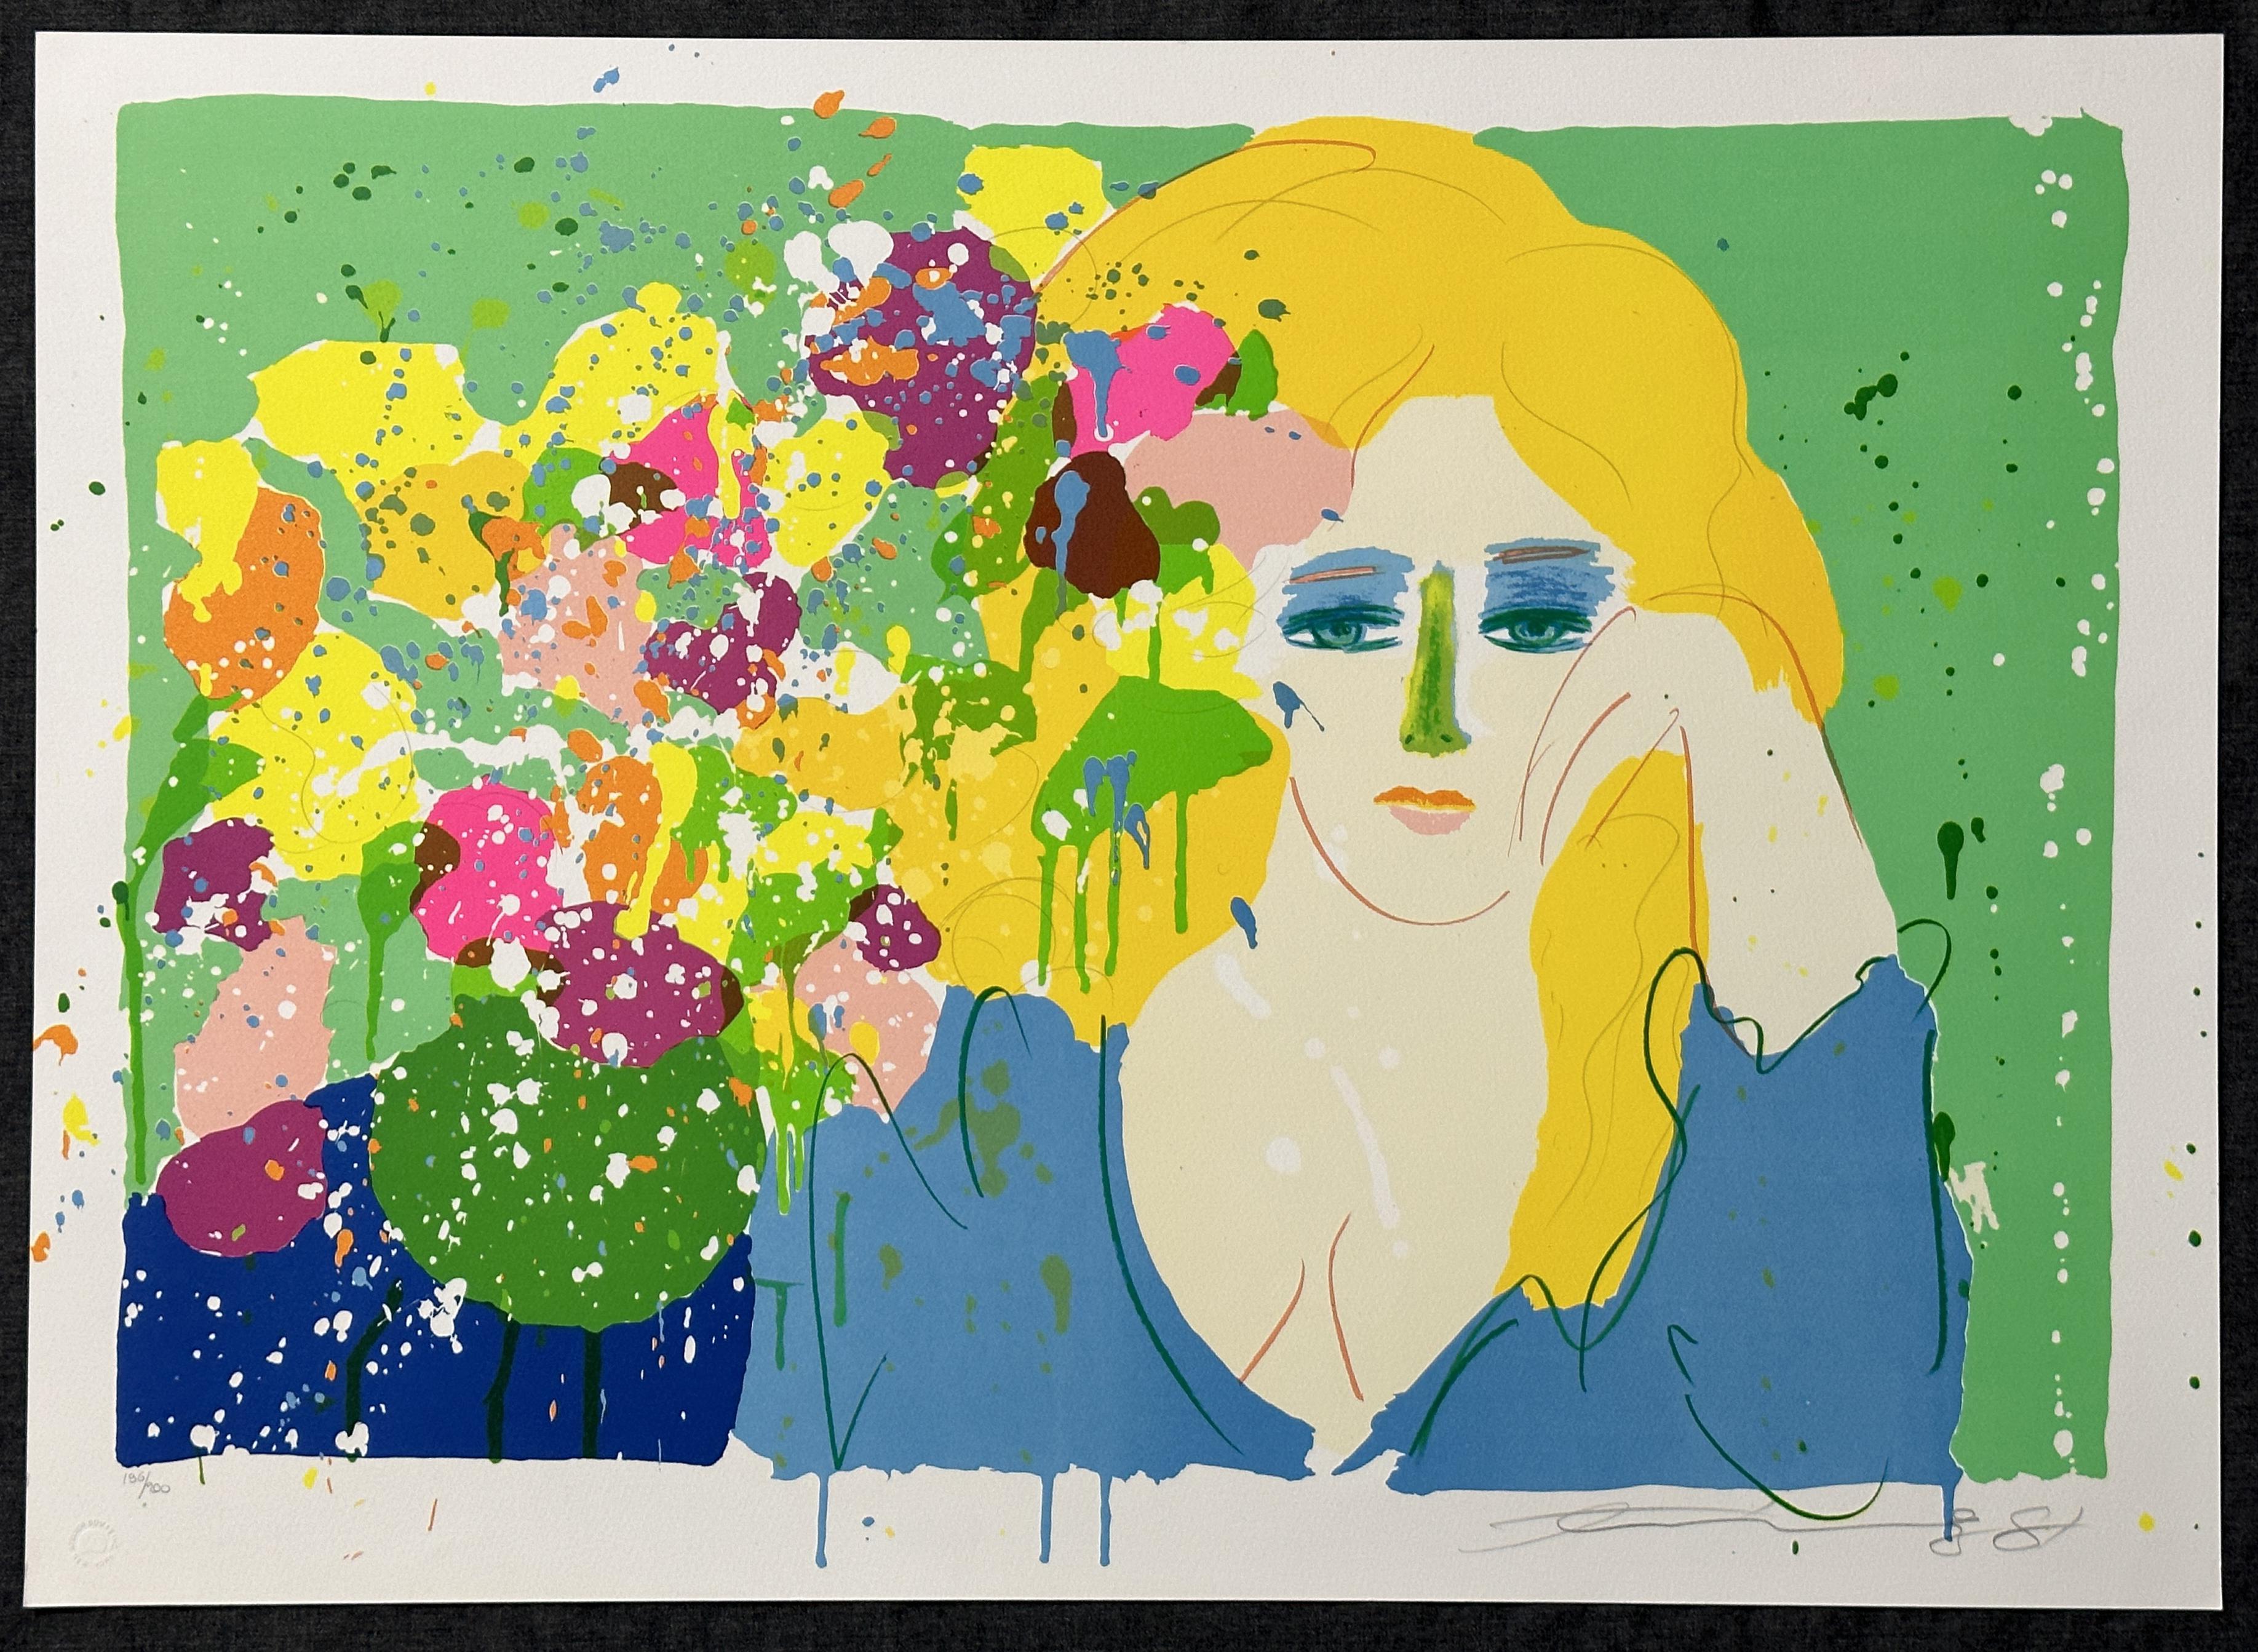  Lady with Vase 1981 Signed Limited Edition Lithograph - Print by Walasse Ting